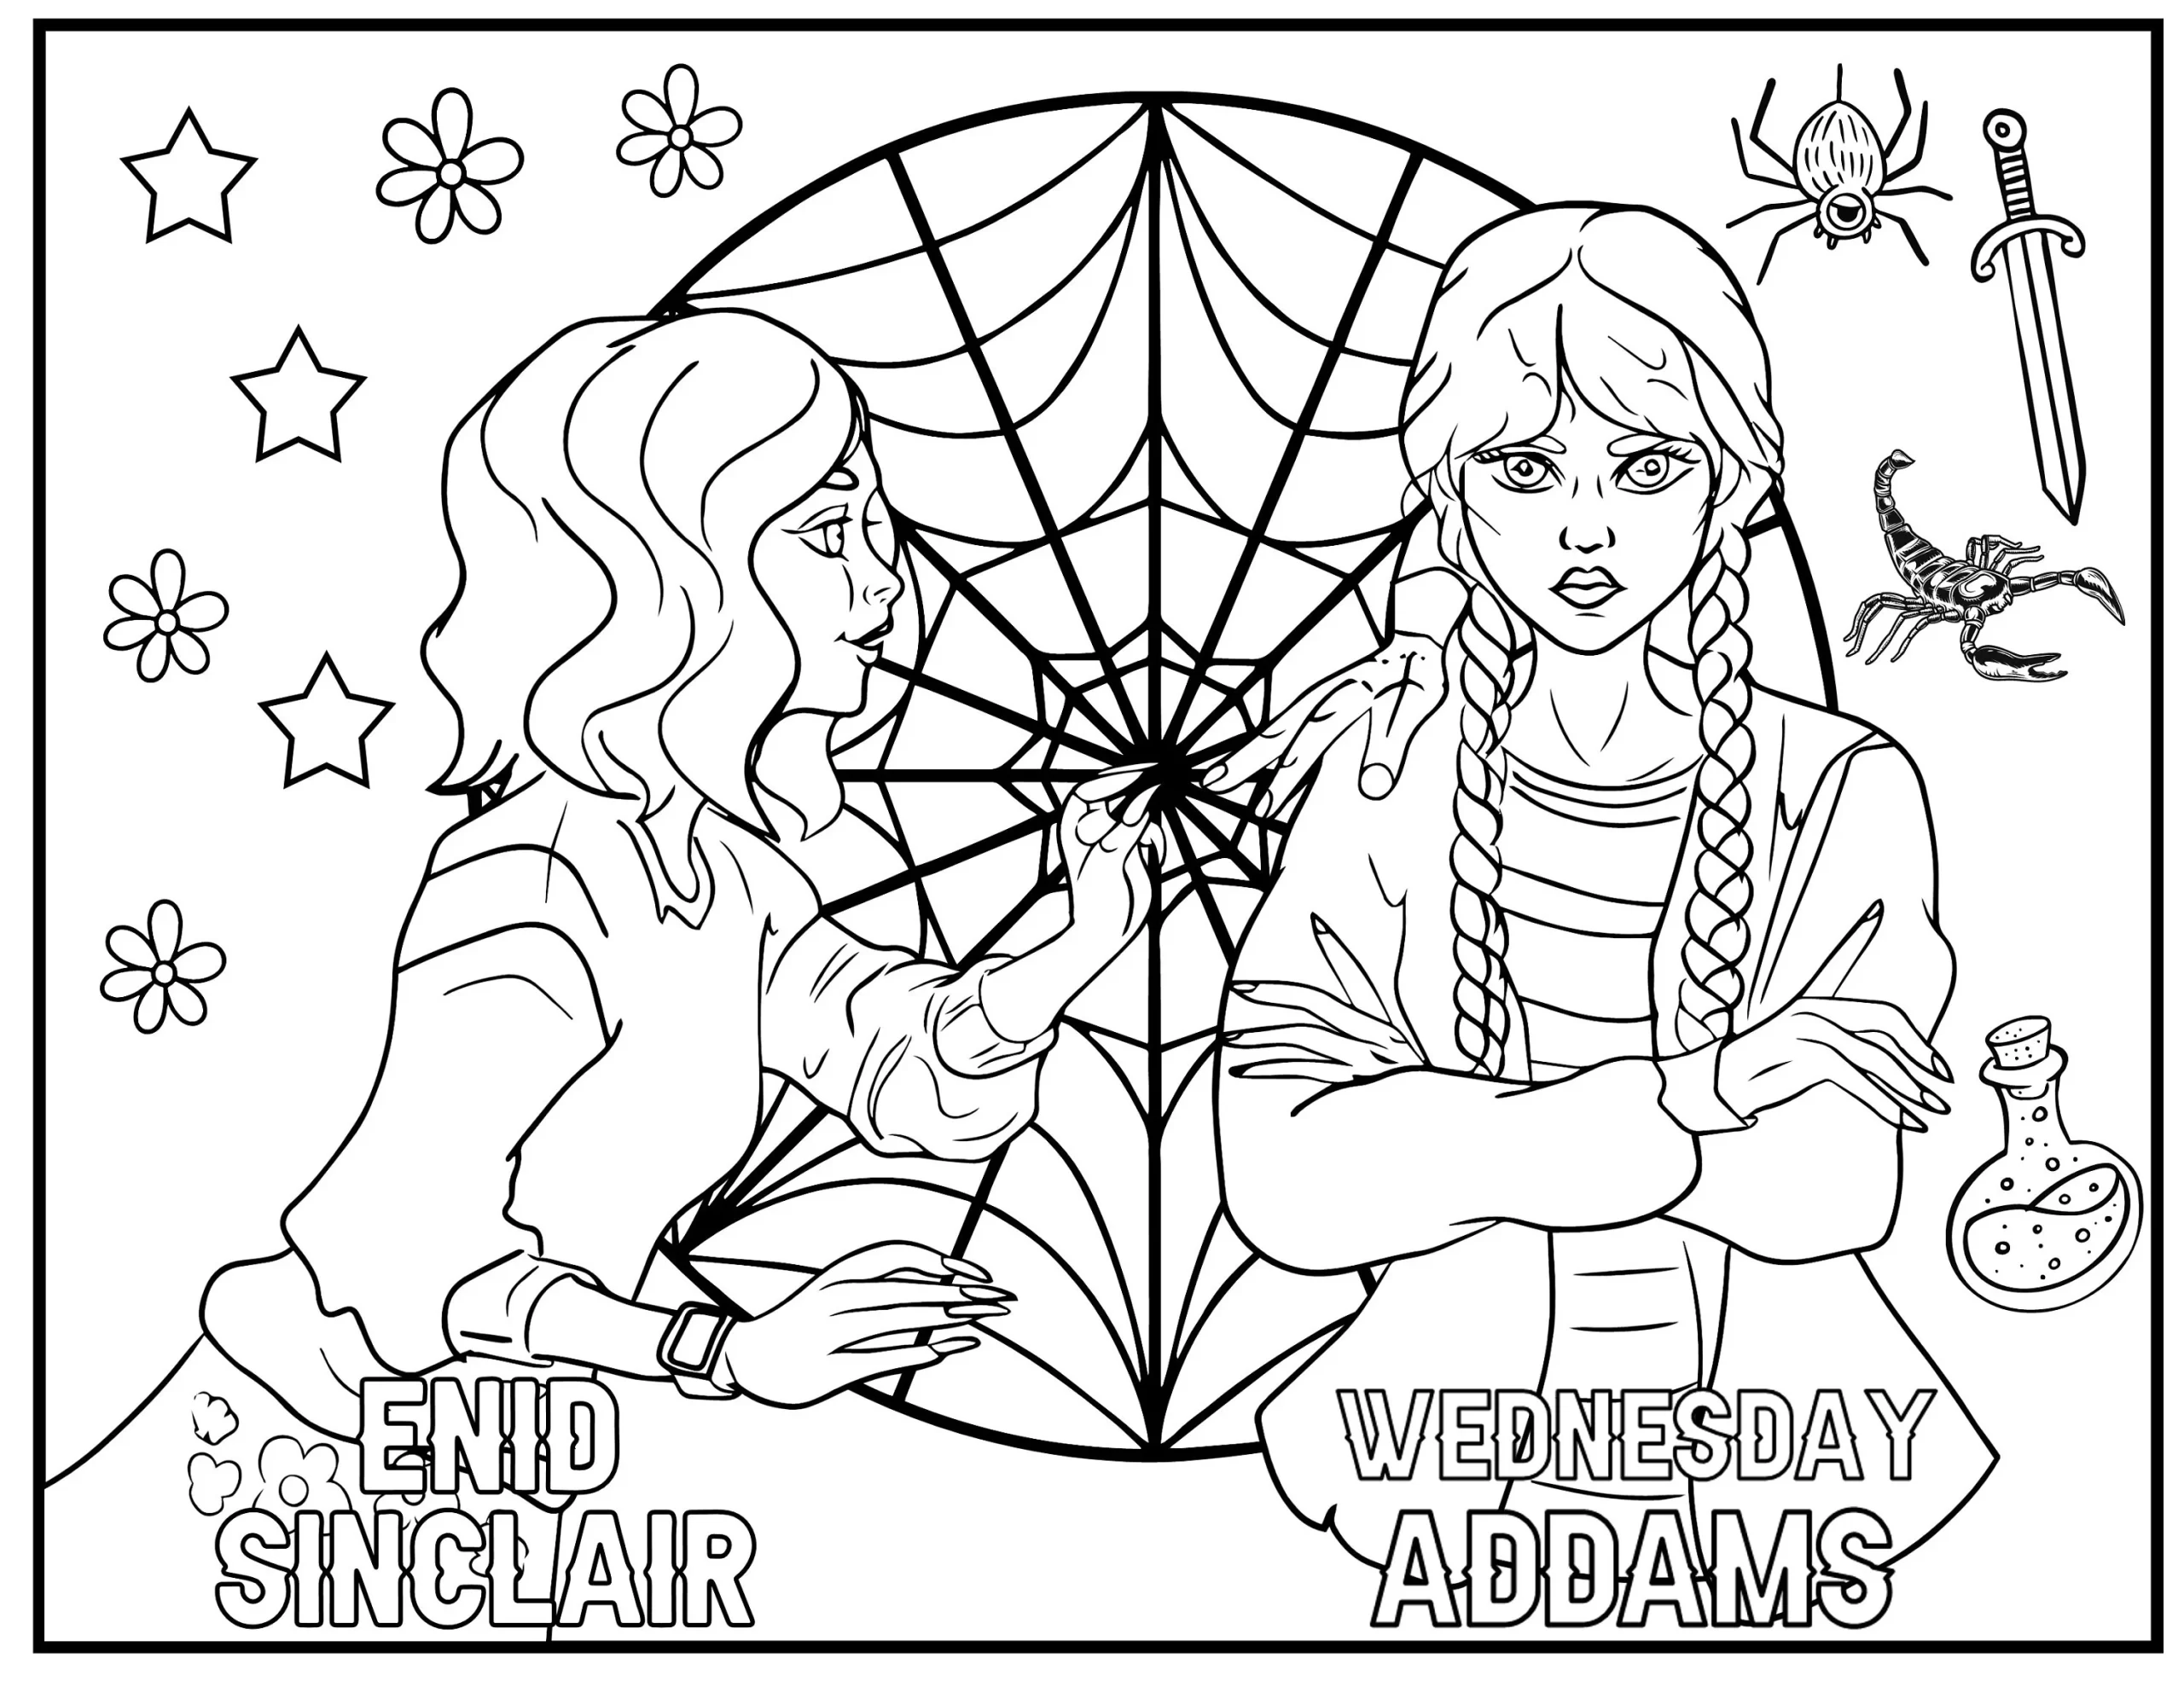 Wednesday addams coloring pages ã imprimer